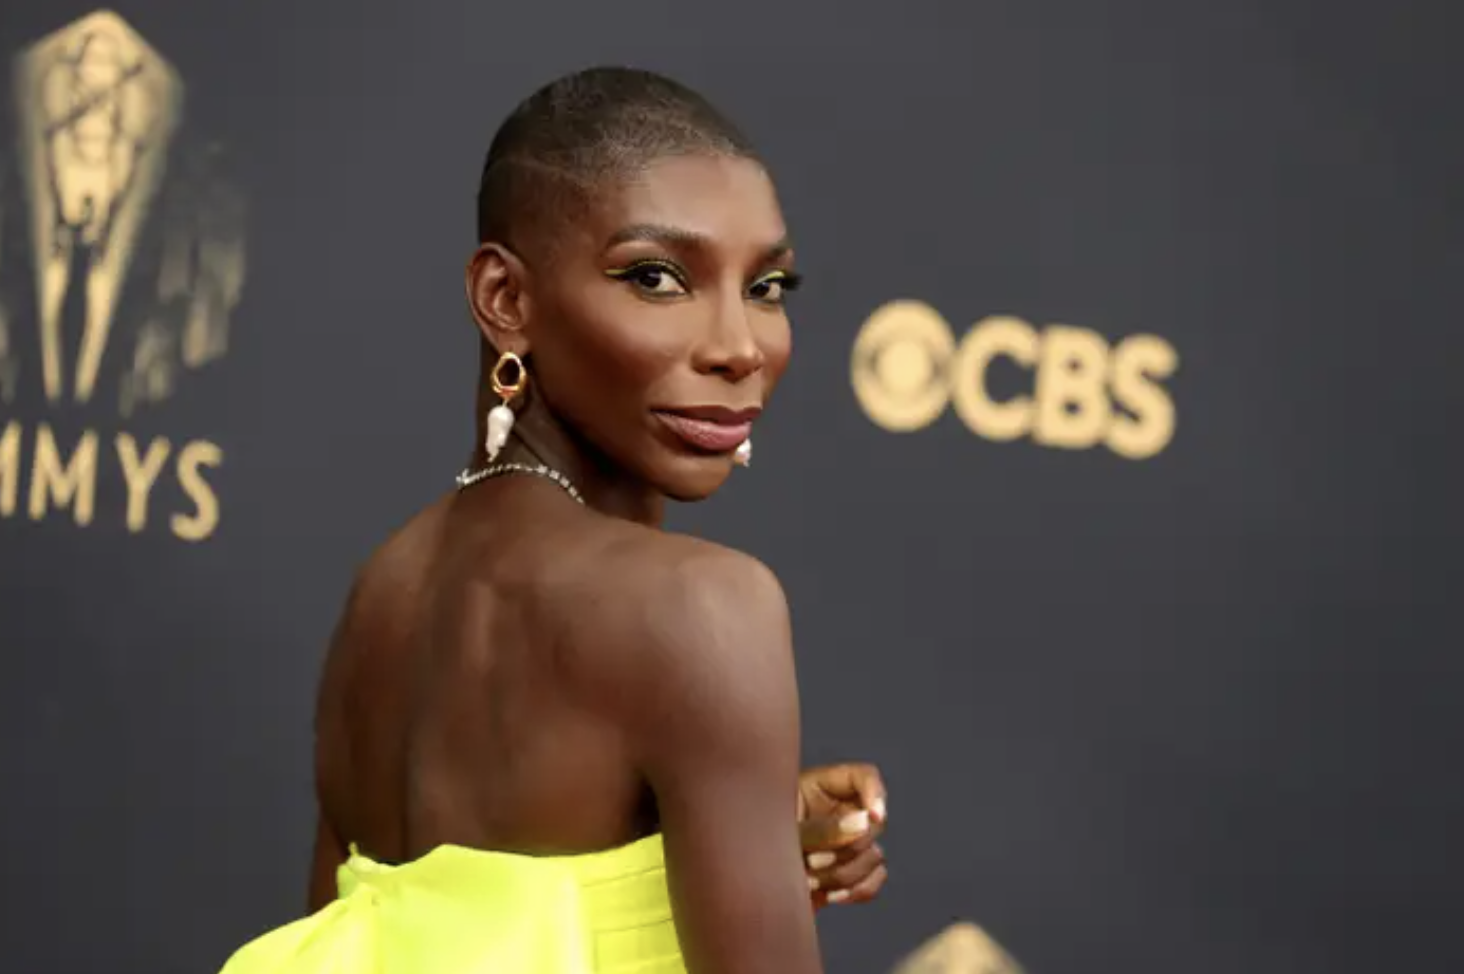 Michaela Coel looking back at the camera in a yellow dress, looking great